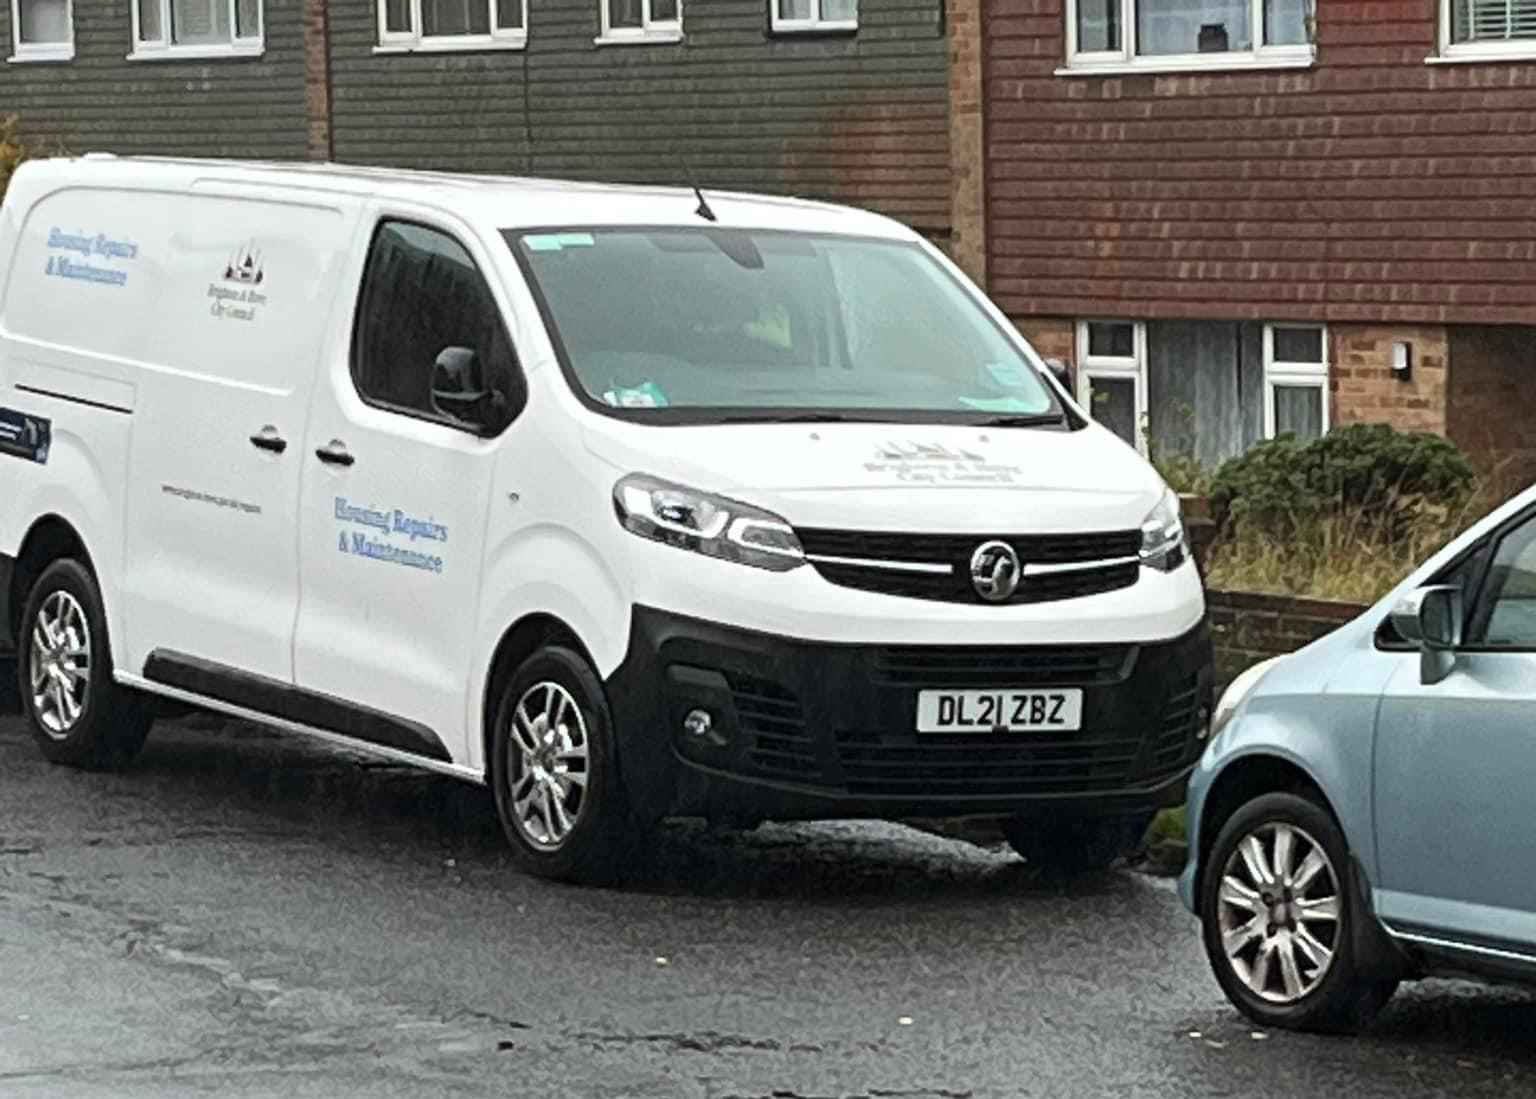 Photograph of DL21 ZBZ - a White Vauxhall Vivaro parked in Hollingdean by a non-resident. 